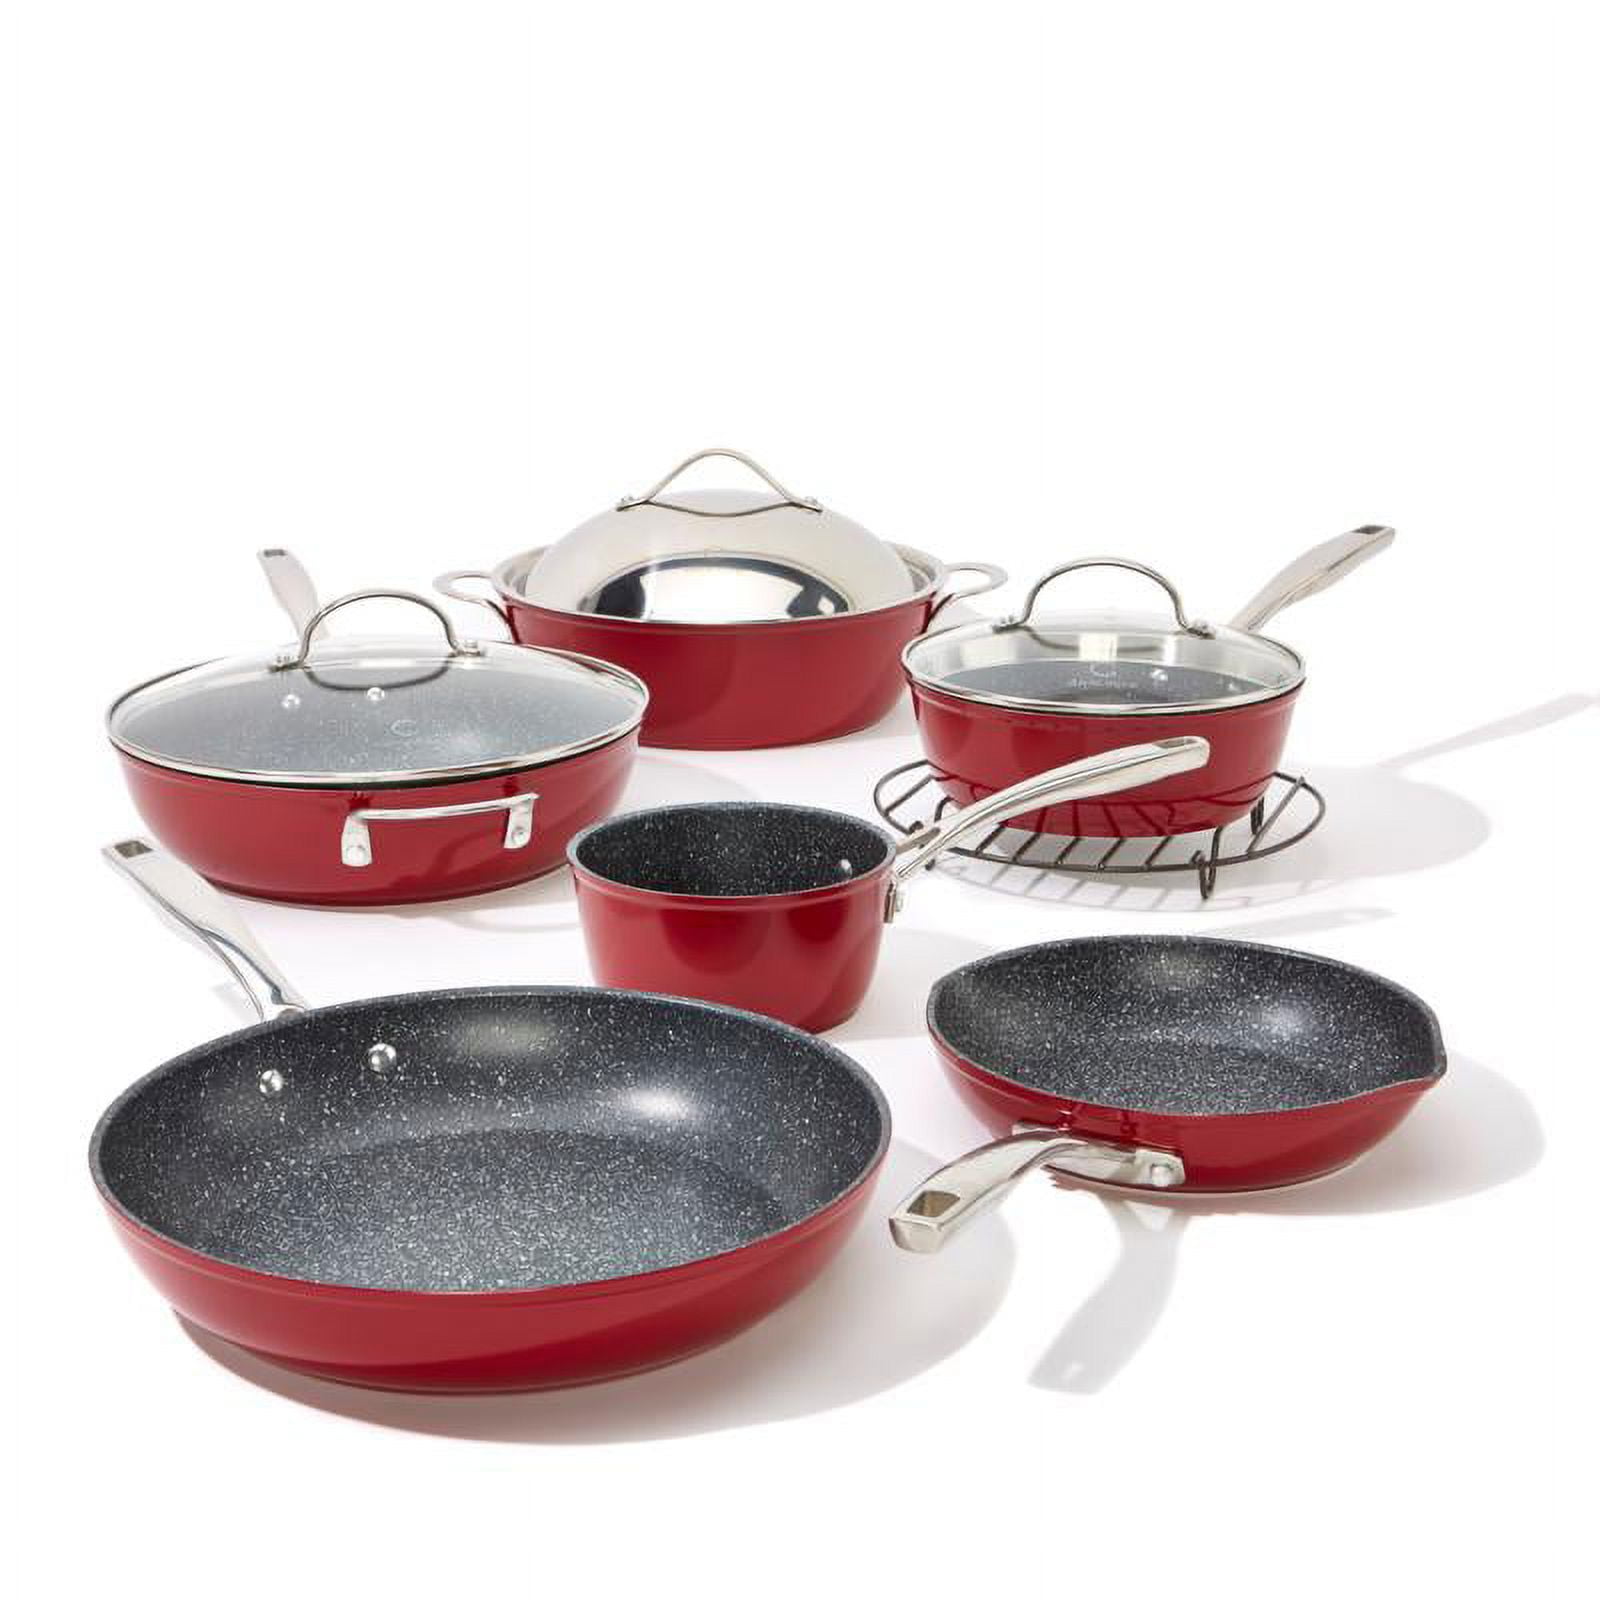 Bosch Home - This Curtis Stone Dura-Pan 4-piece Chef's